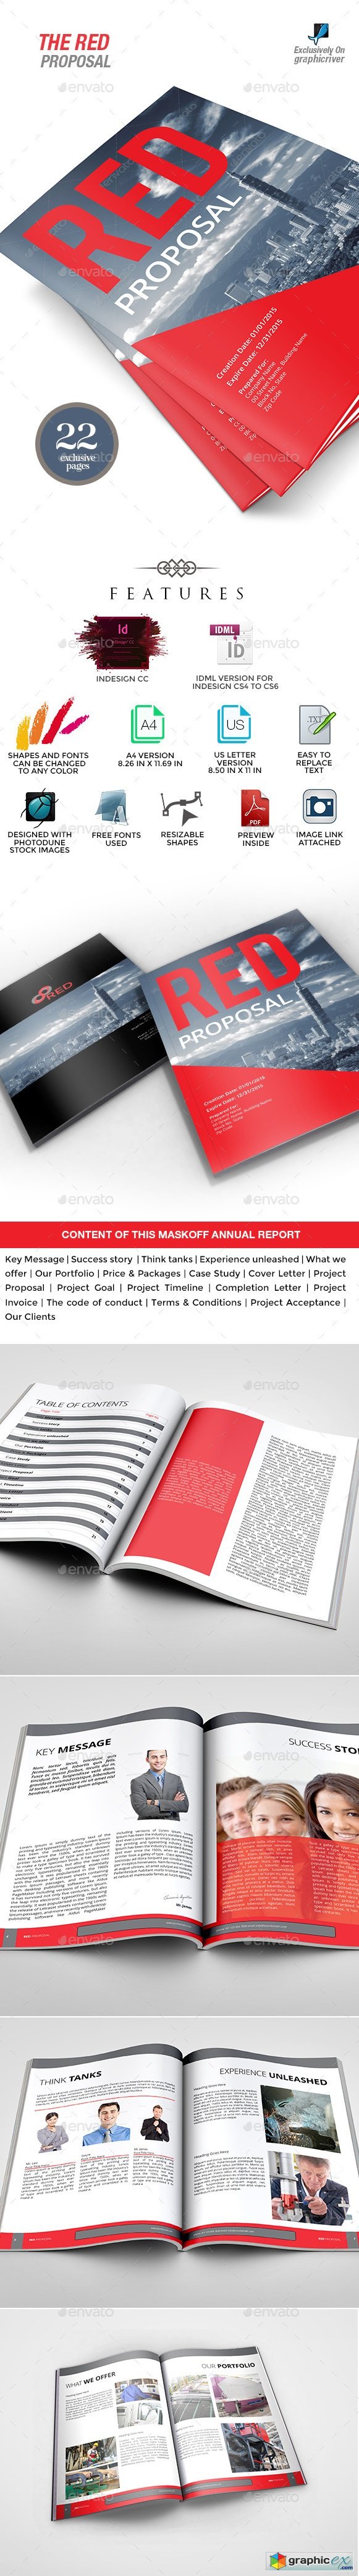 The Red Multipurpose Proposal Template